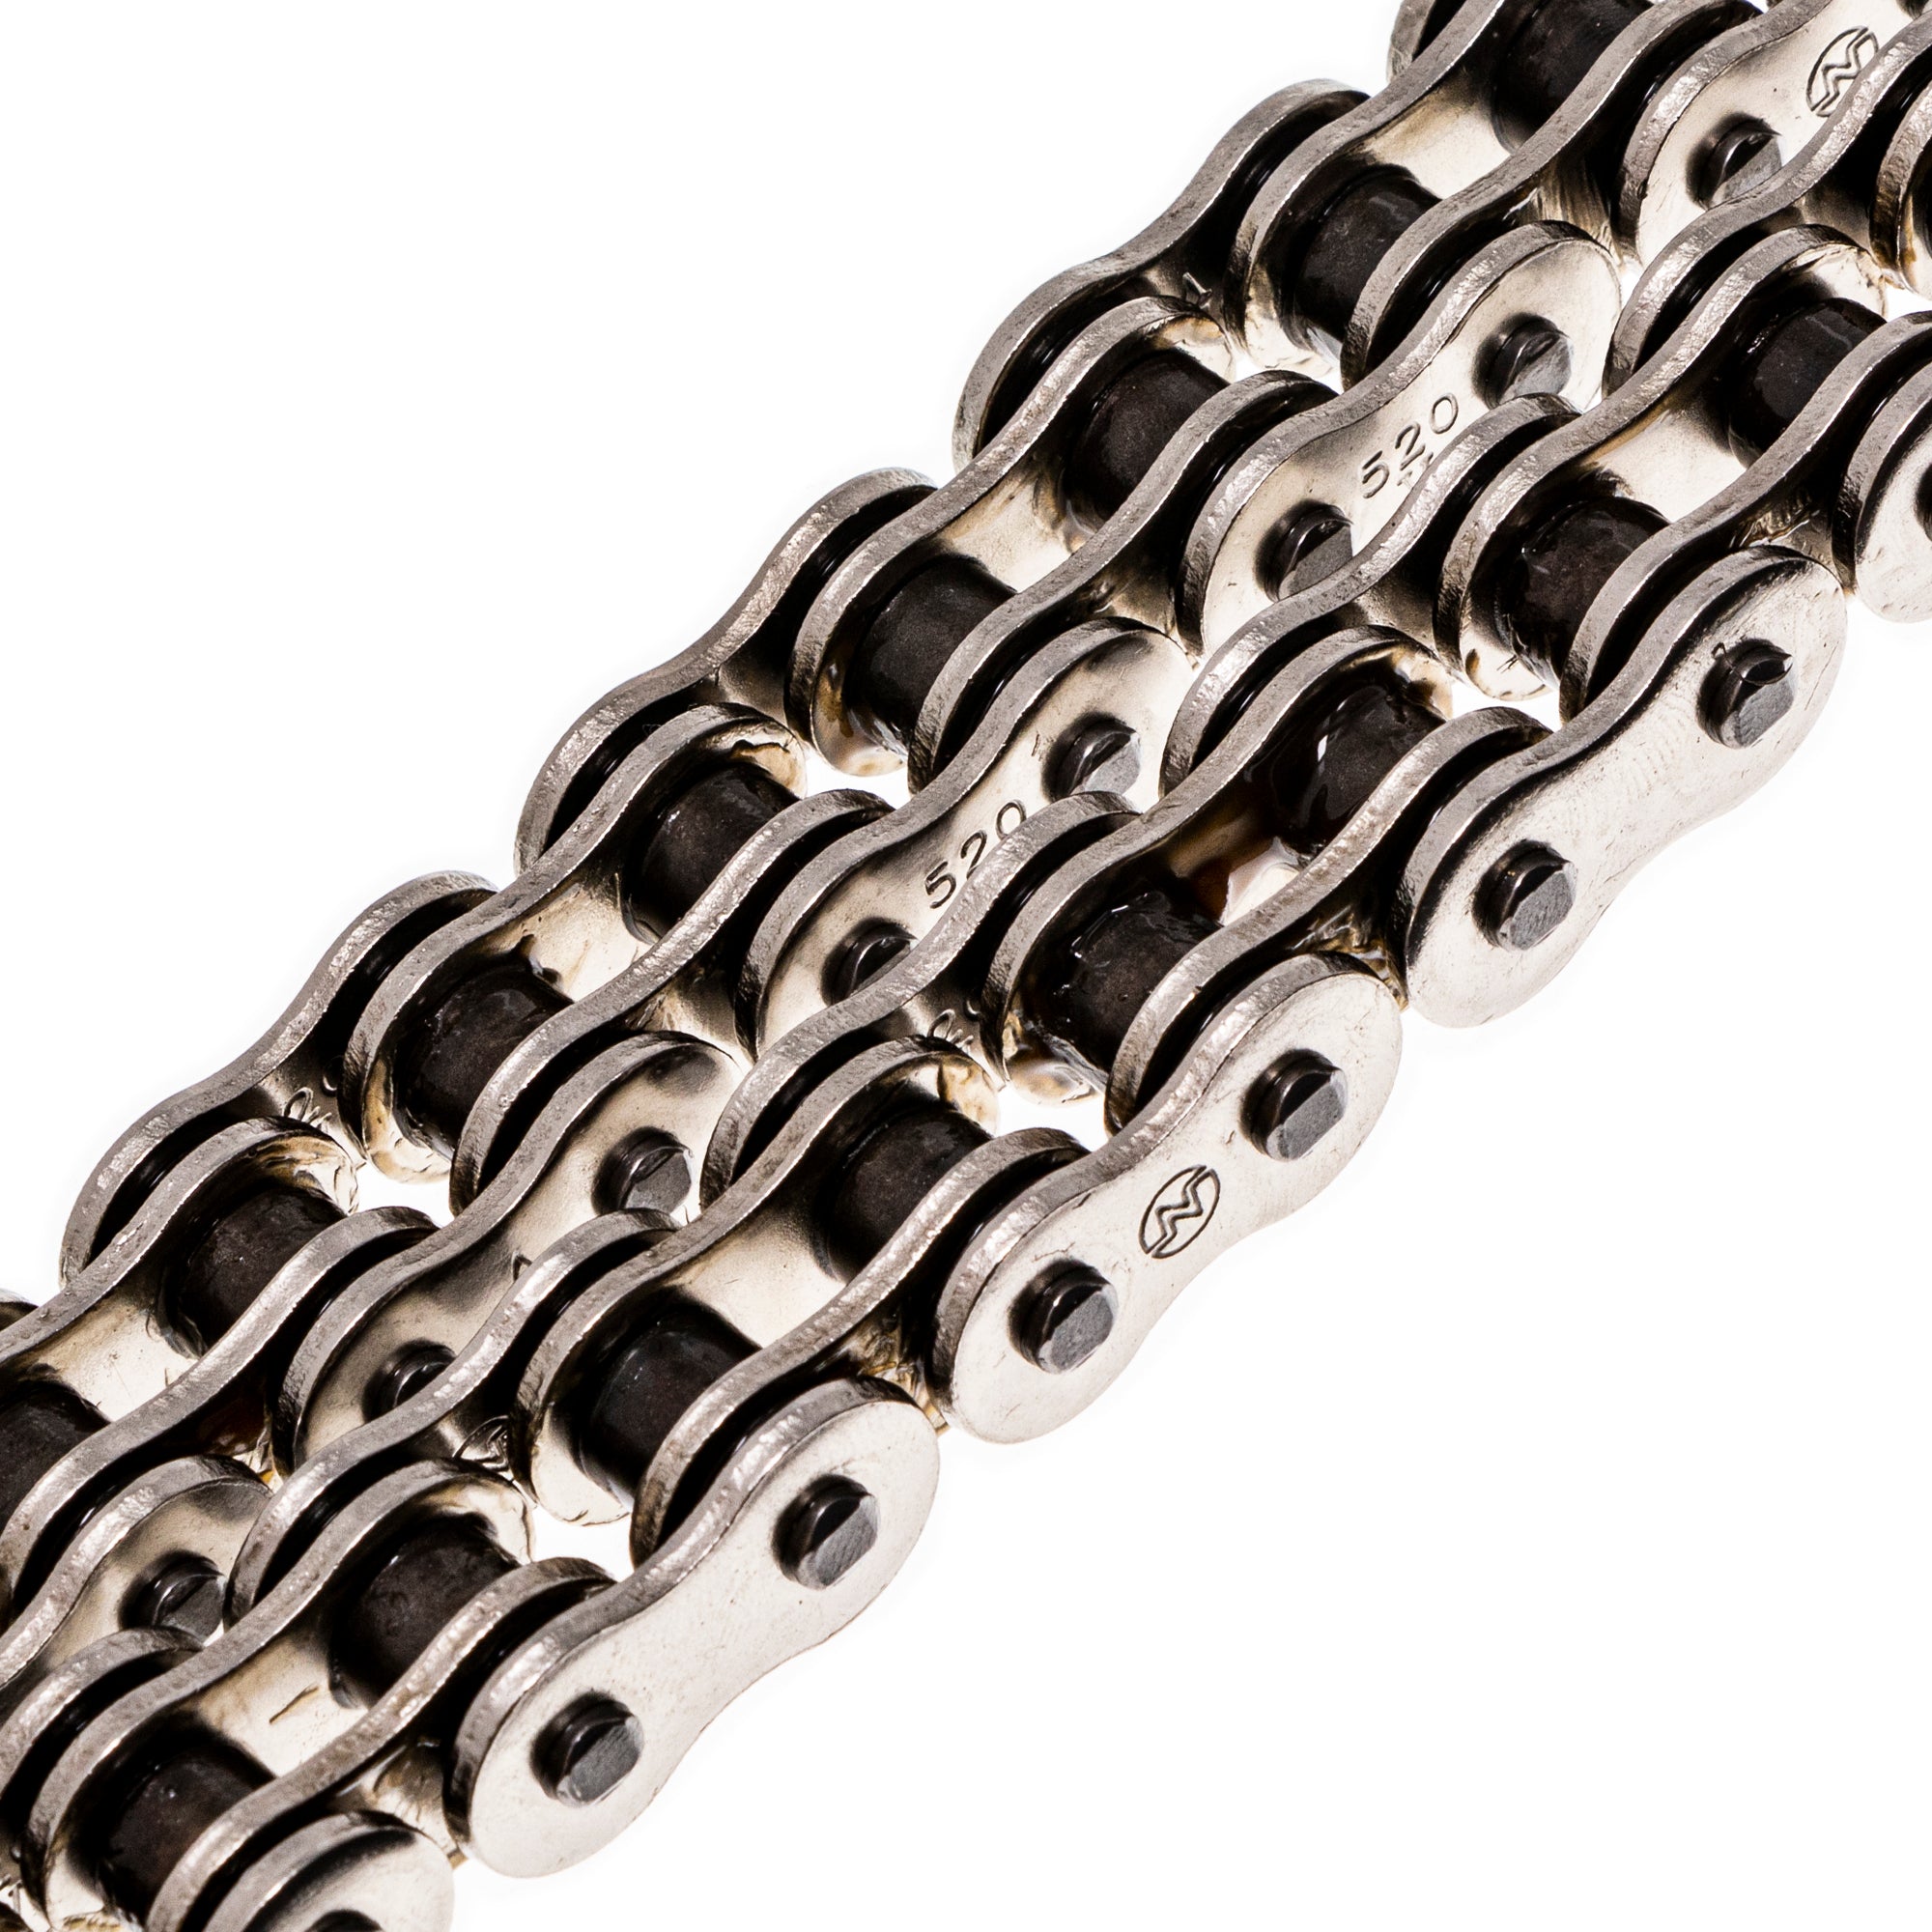 Drive Chain 122 Standard Non O-Ring w/ Master Link for zOTHER 5212 NICHE 519-CDC2323H